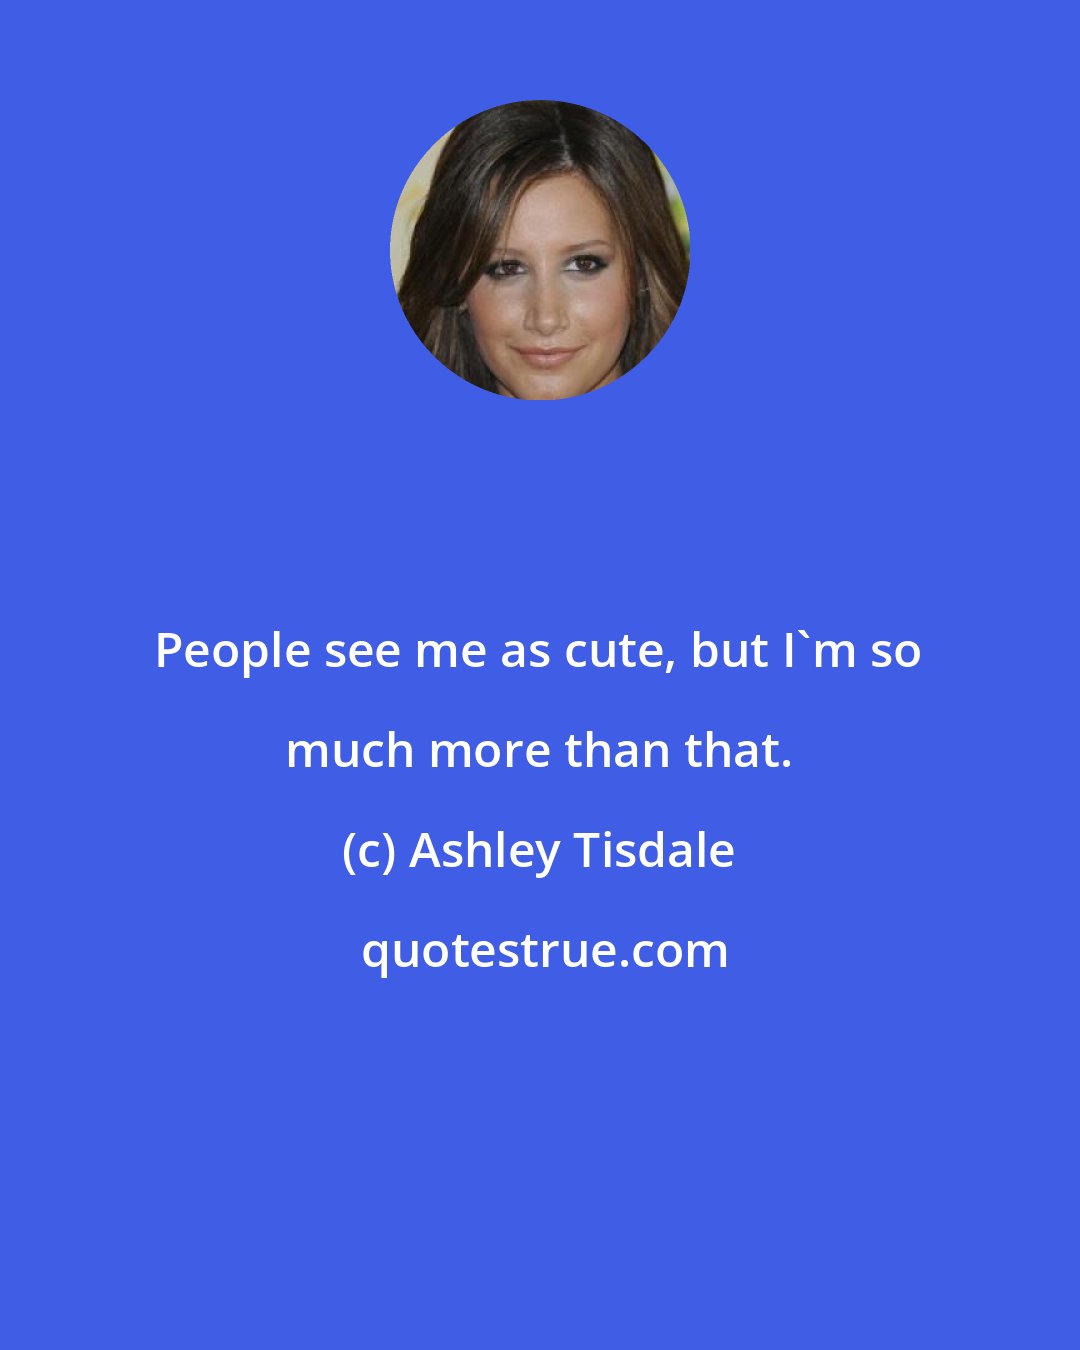 Ashley Tisdale: People see me as cute, but I'm so much more than that.